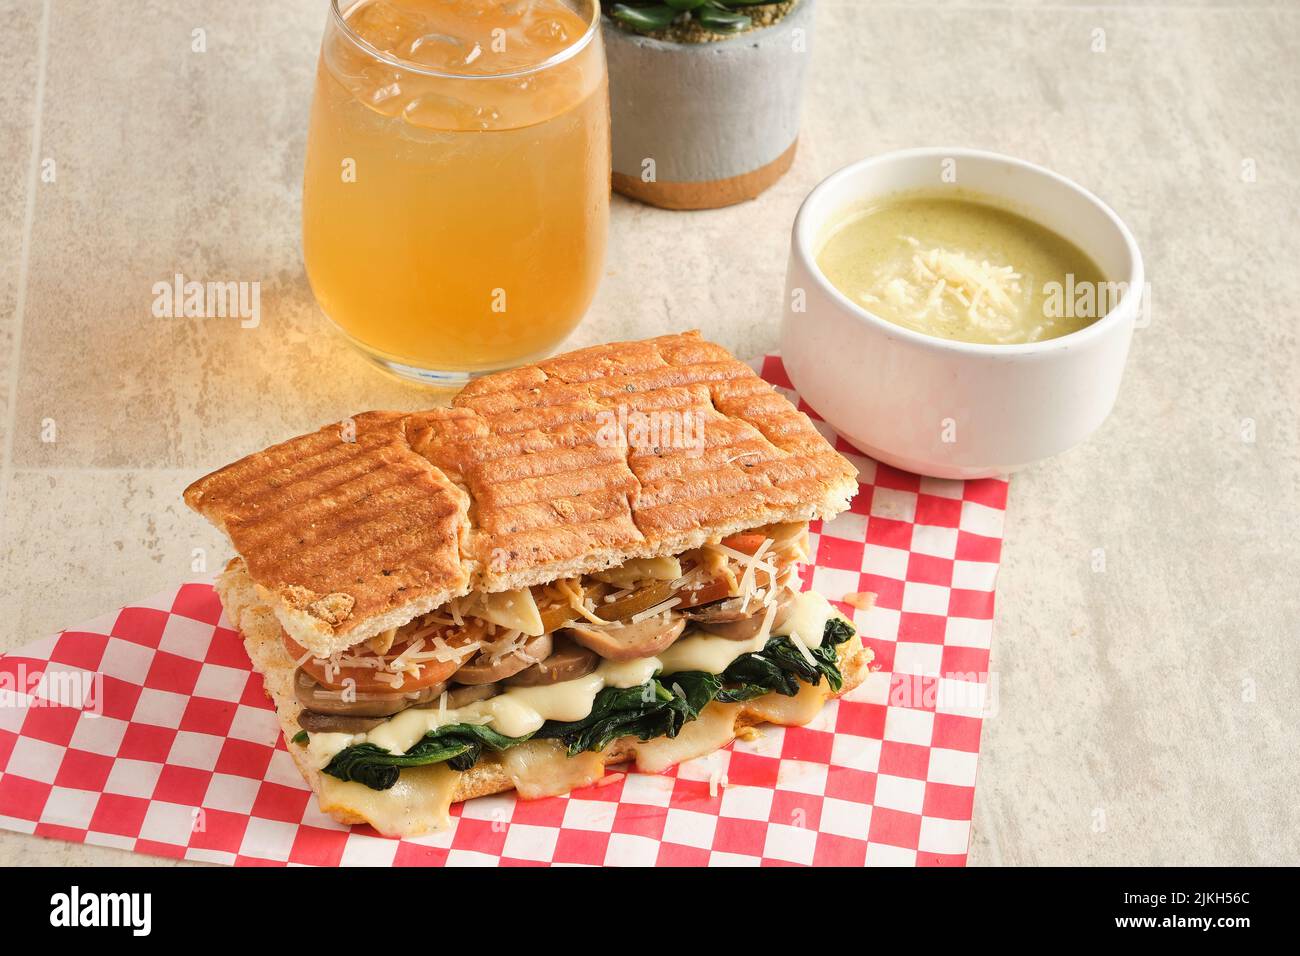 A fresh panini with spinach, mushrooms, cheese and tomatoes Stock Photo